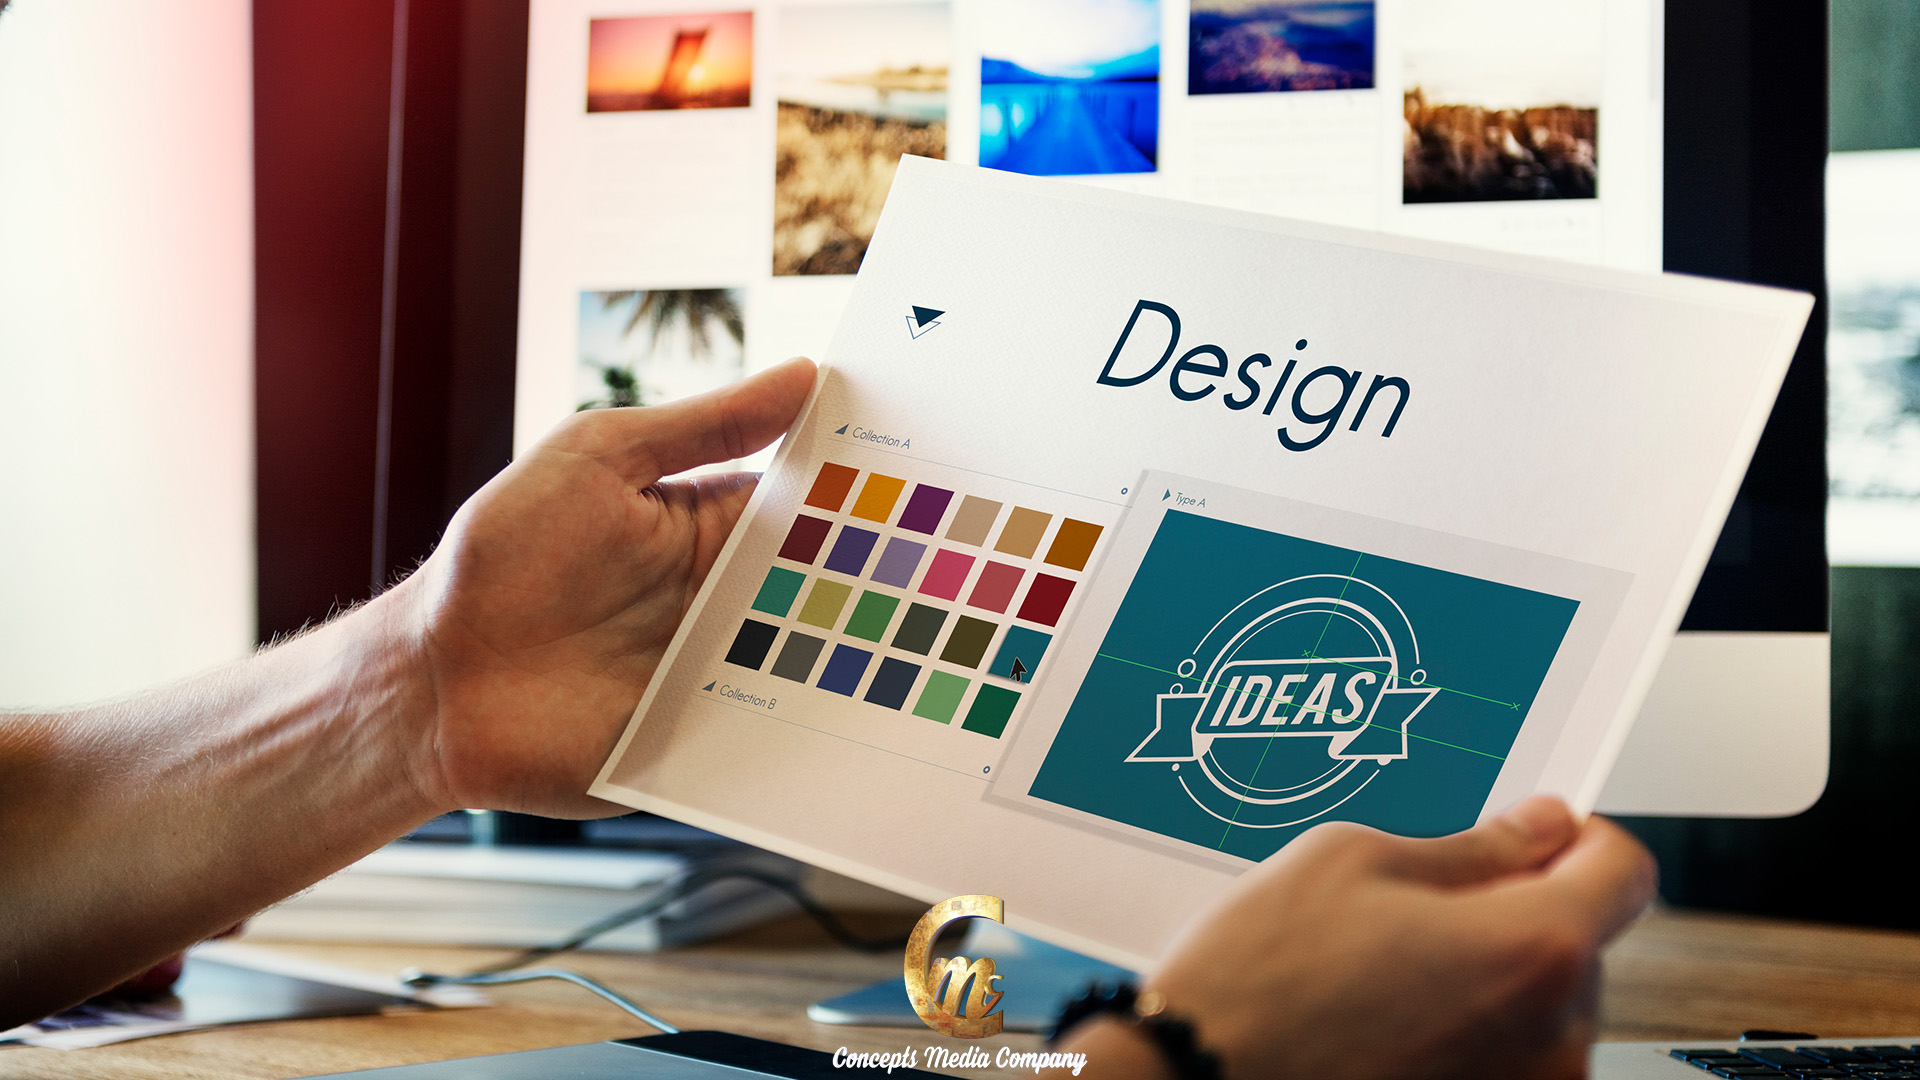 CONCEPTS MEDIA COMPANY: YOUR ONE-STOP SHOP FOR LOGO DESIGN